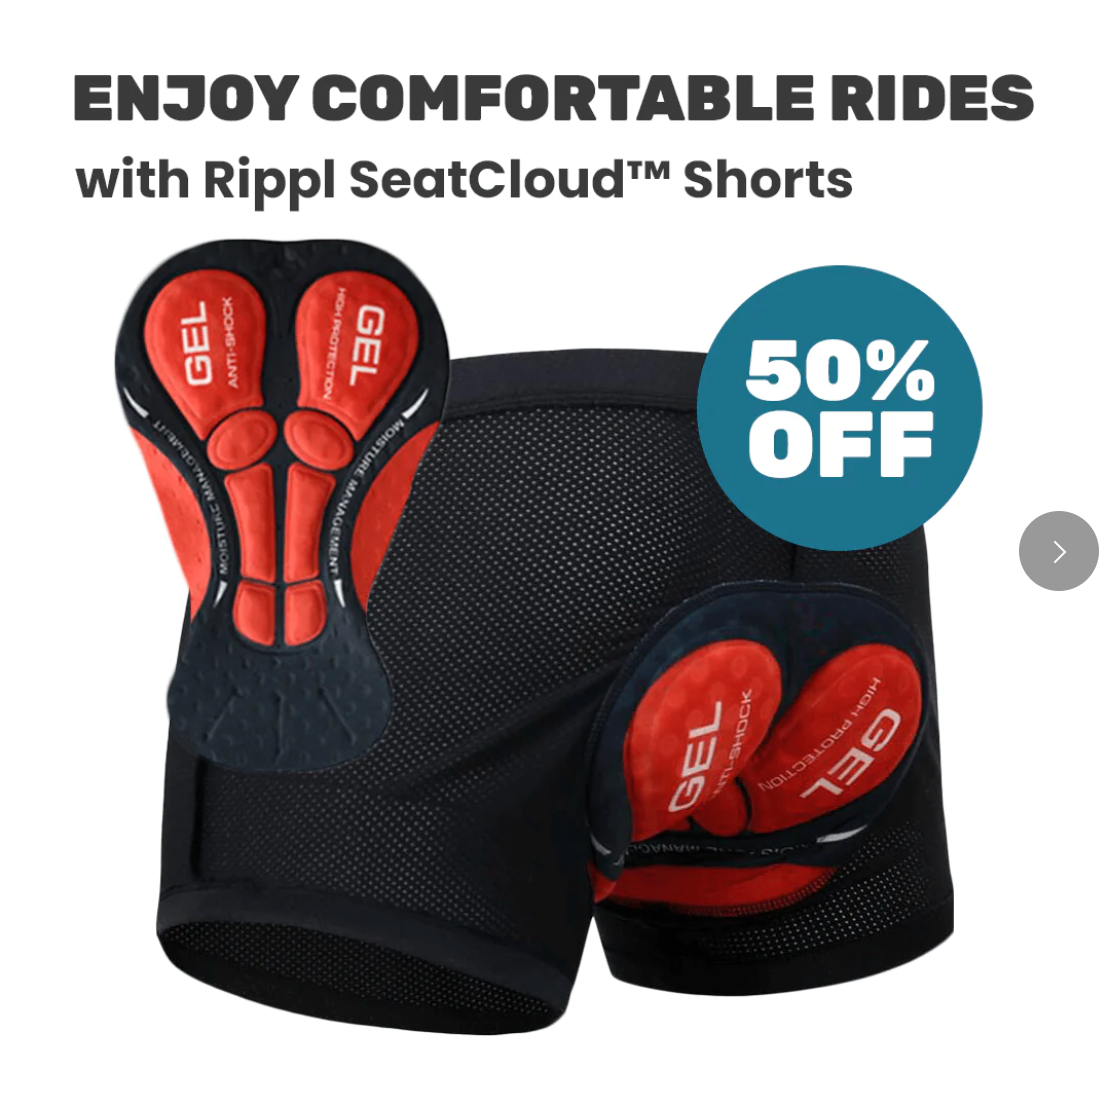 SEATCLOUD™ SHORTS by RIPPL